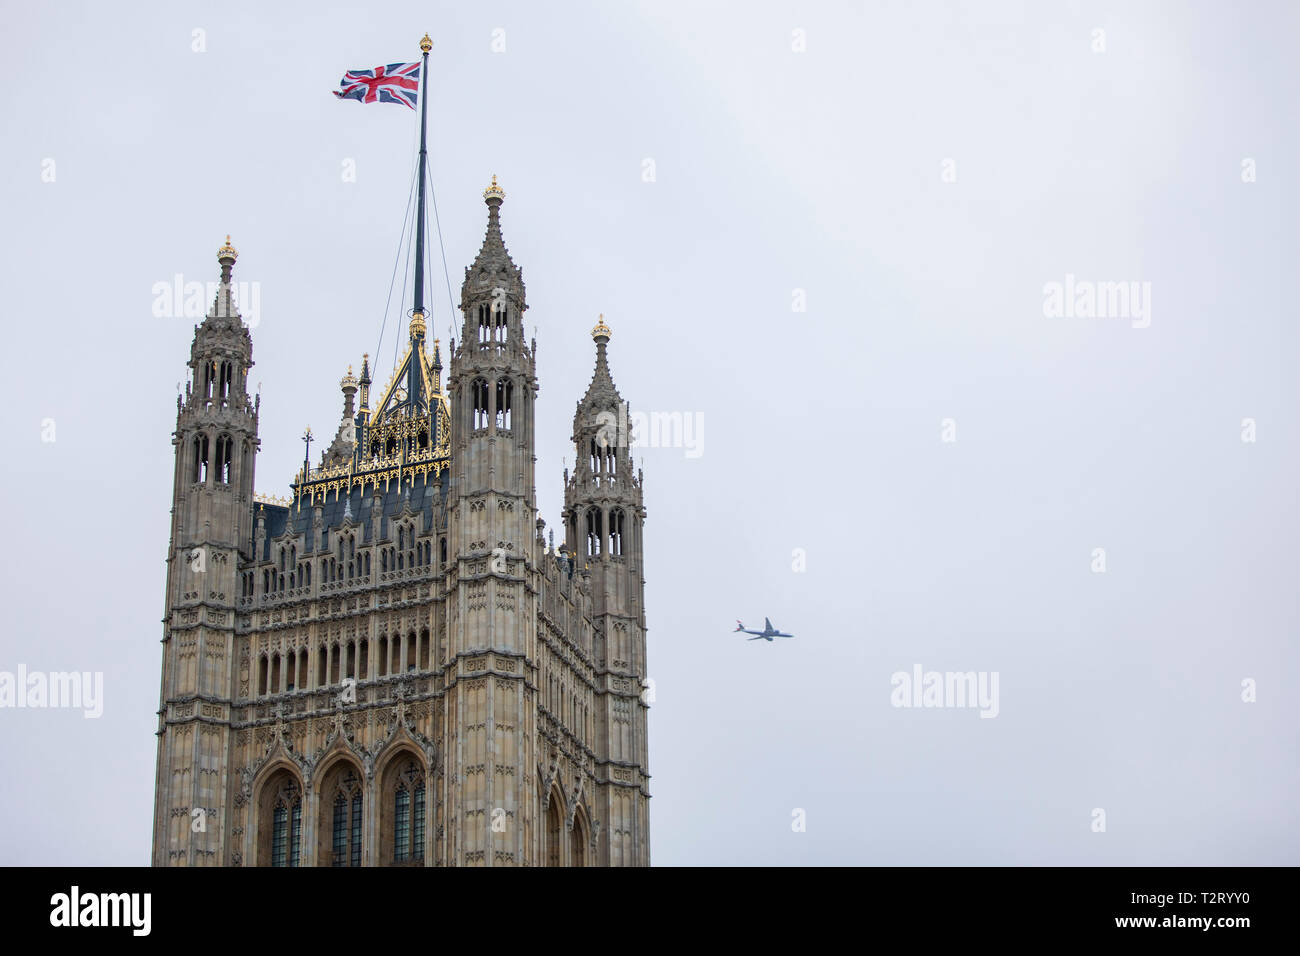 A passenger aeroplane passes the Houses of Parliament tower in December 2018. Stock Photo